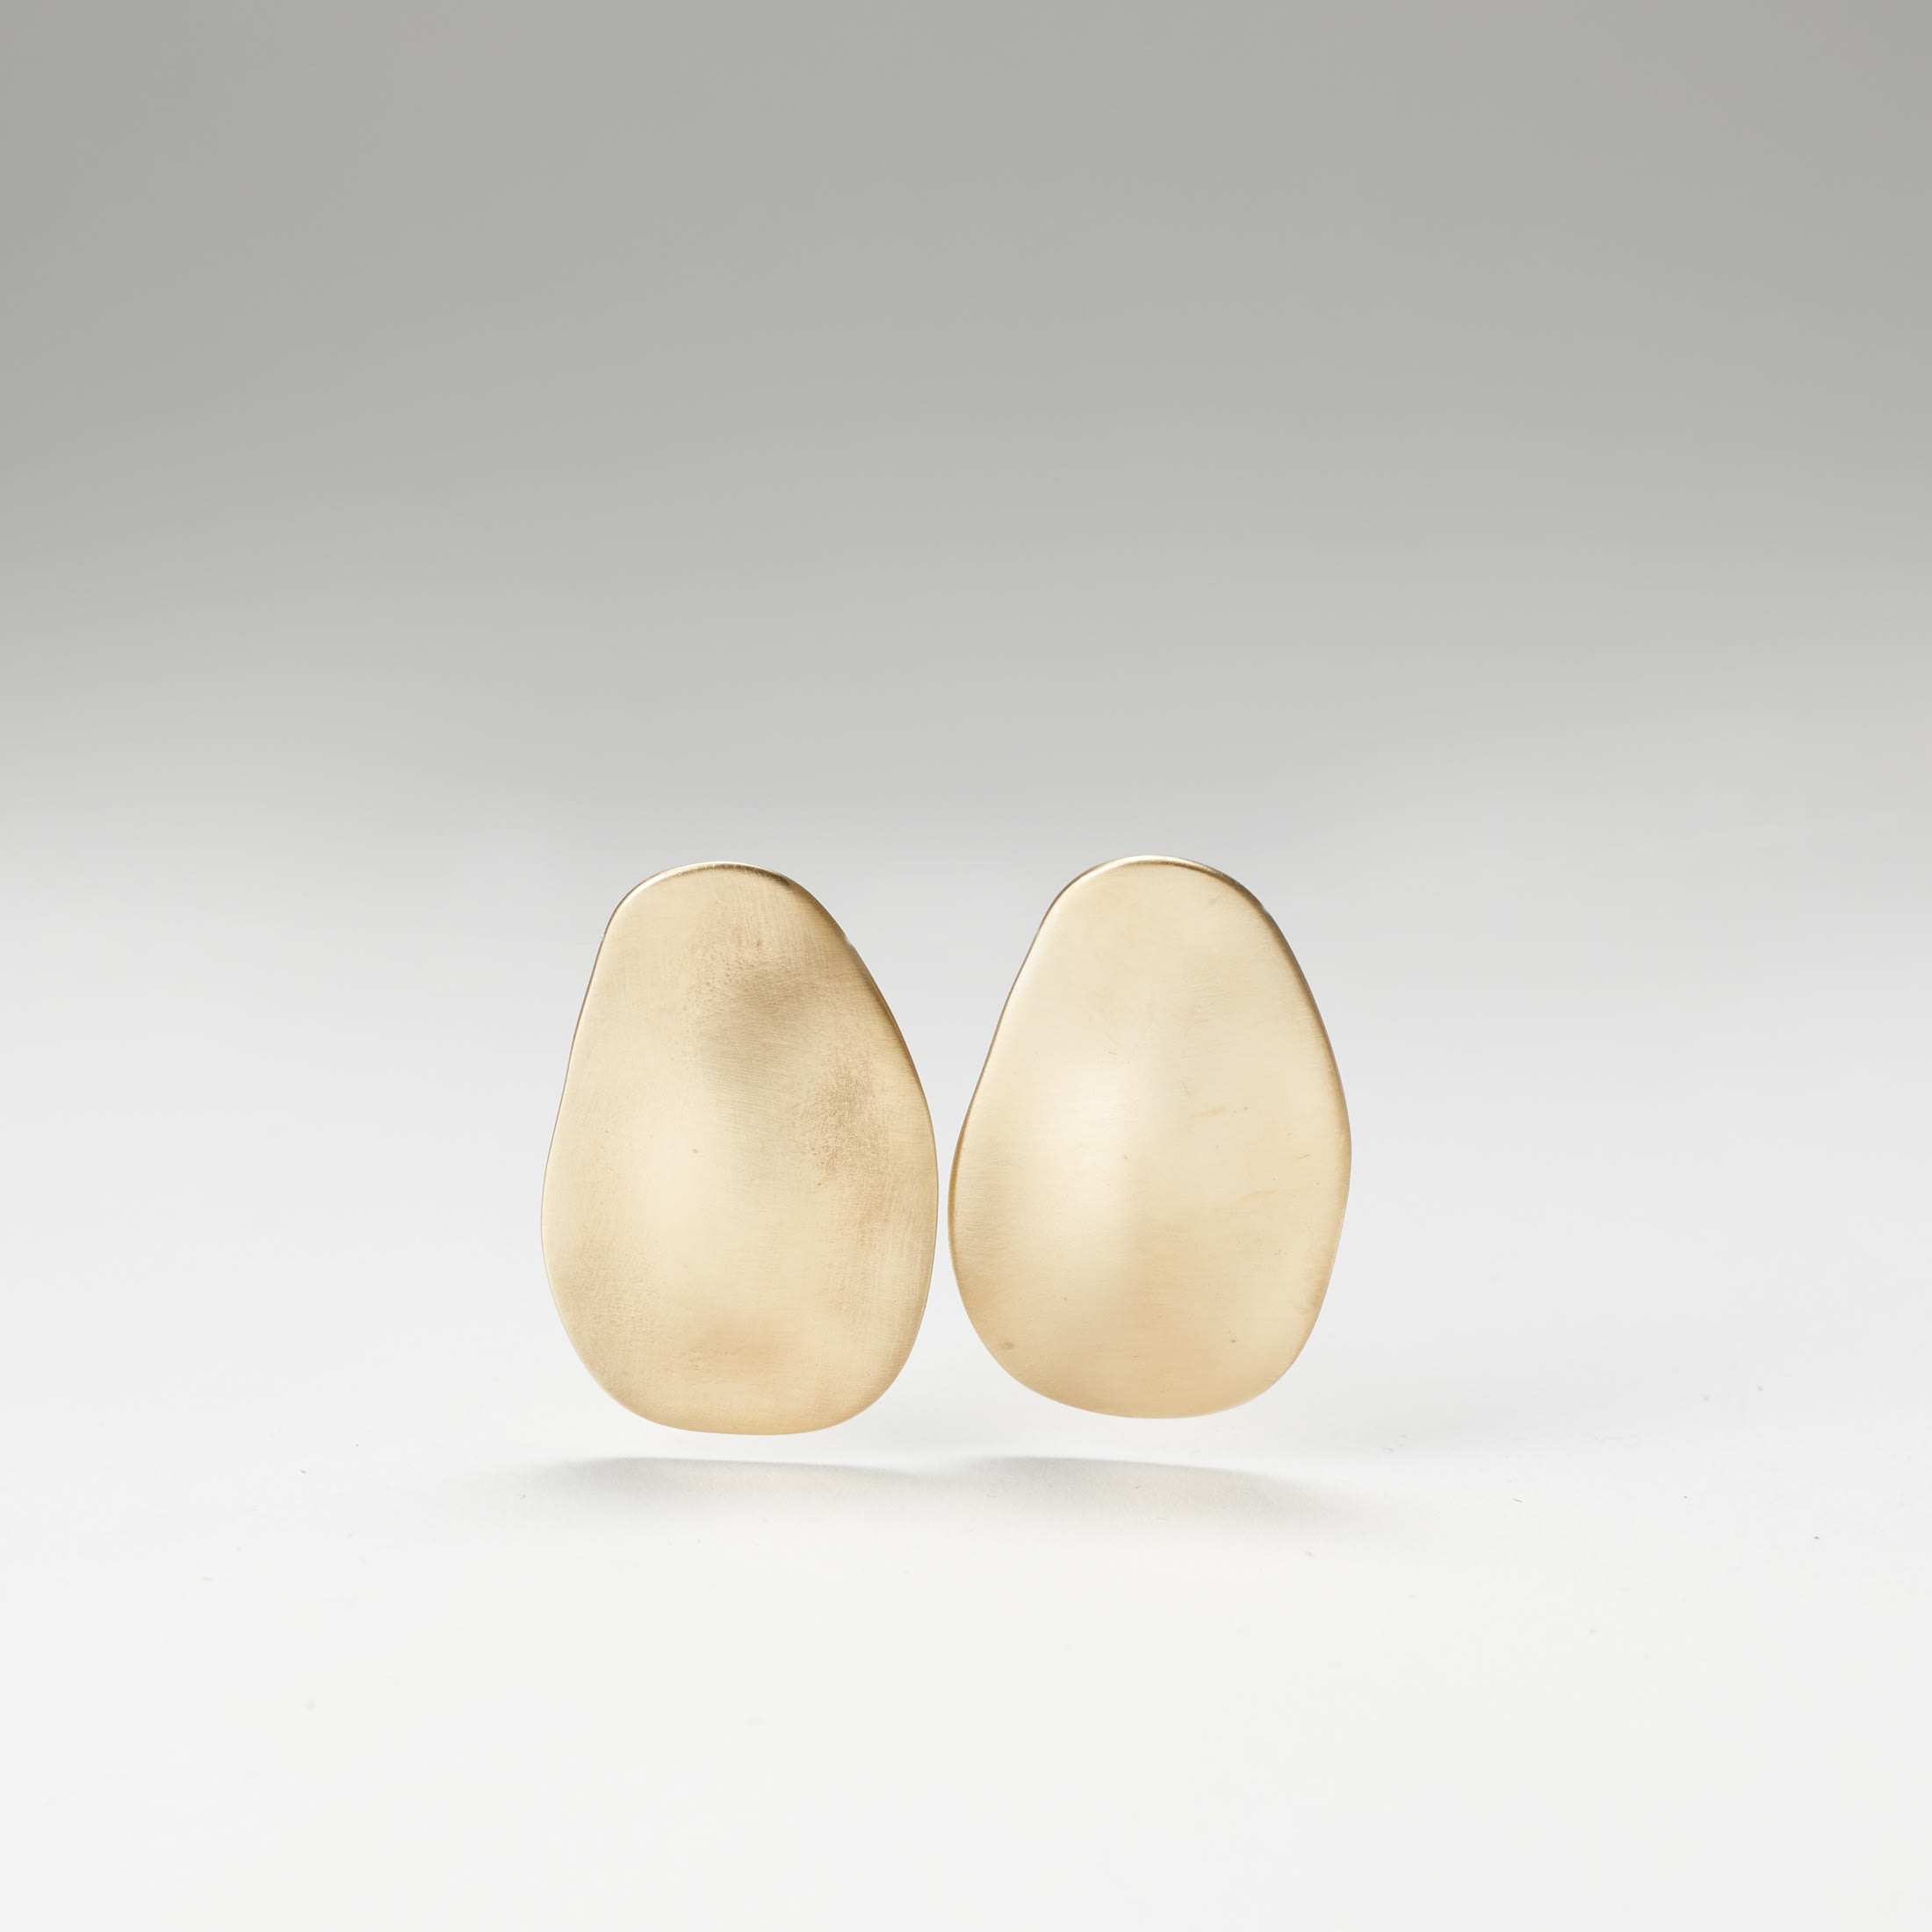 Kate Ruck earrings - Form & Concept Gallery